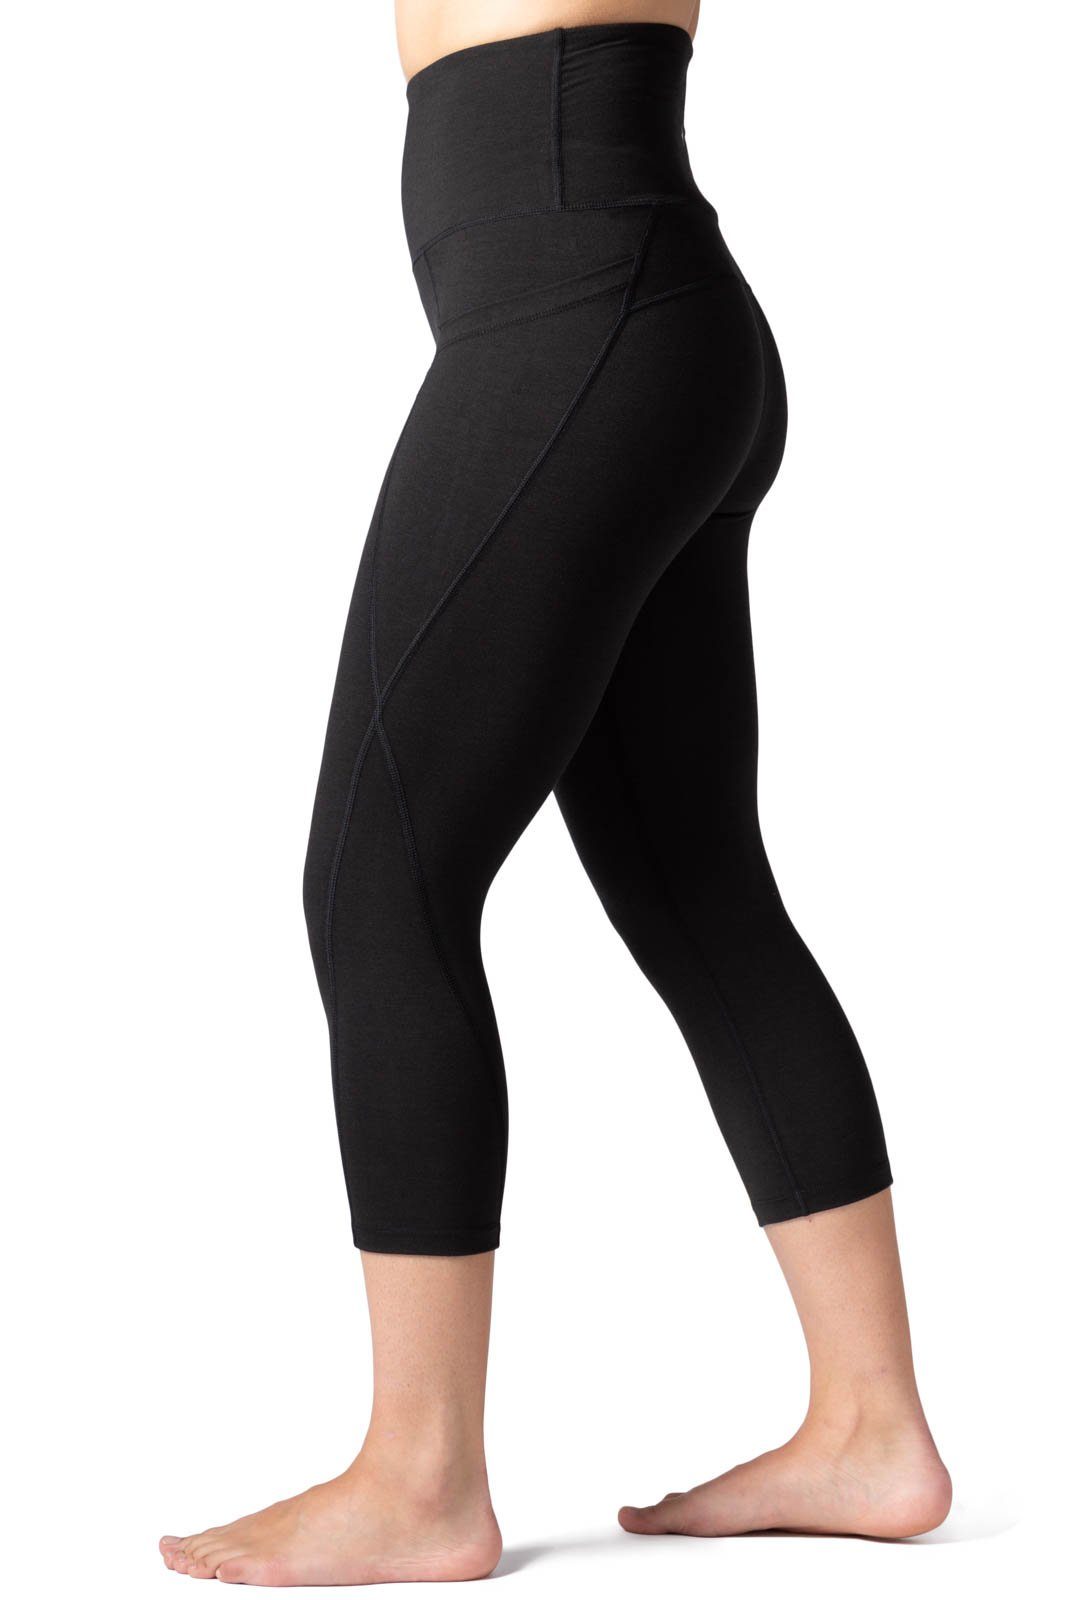 Bodyactive Women's Polyester Spandex Black Capri Yoga Pants with Pocket  Essential High Waisted for Workout-LC07-BLK